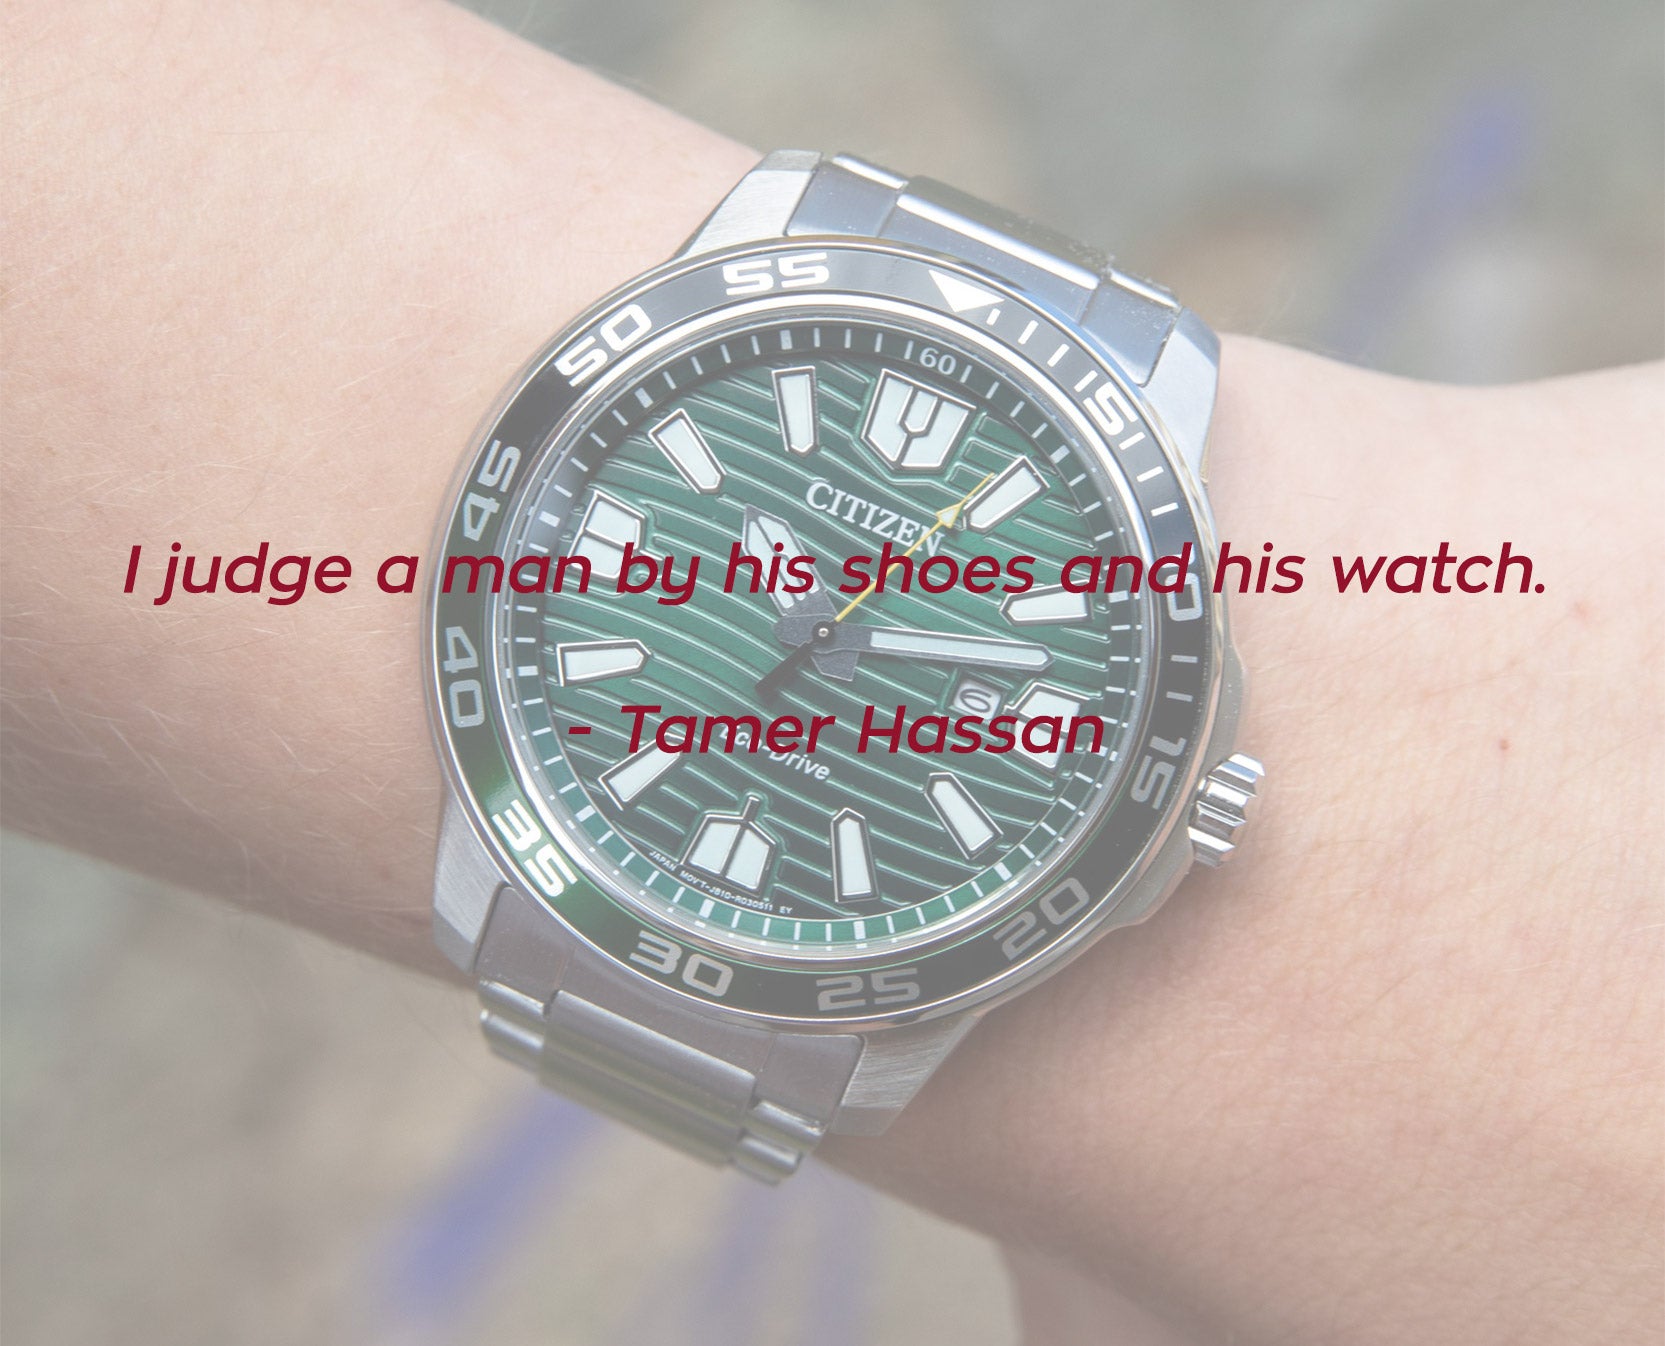 Quotes Only Watch Lovers Will Appreciate